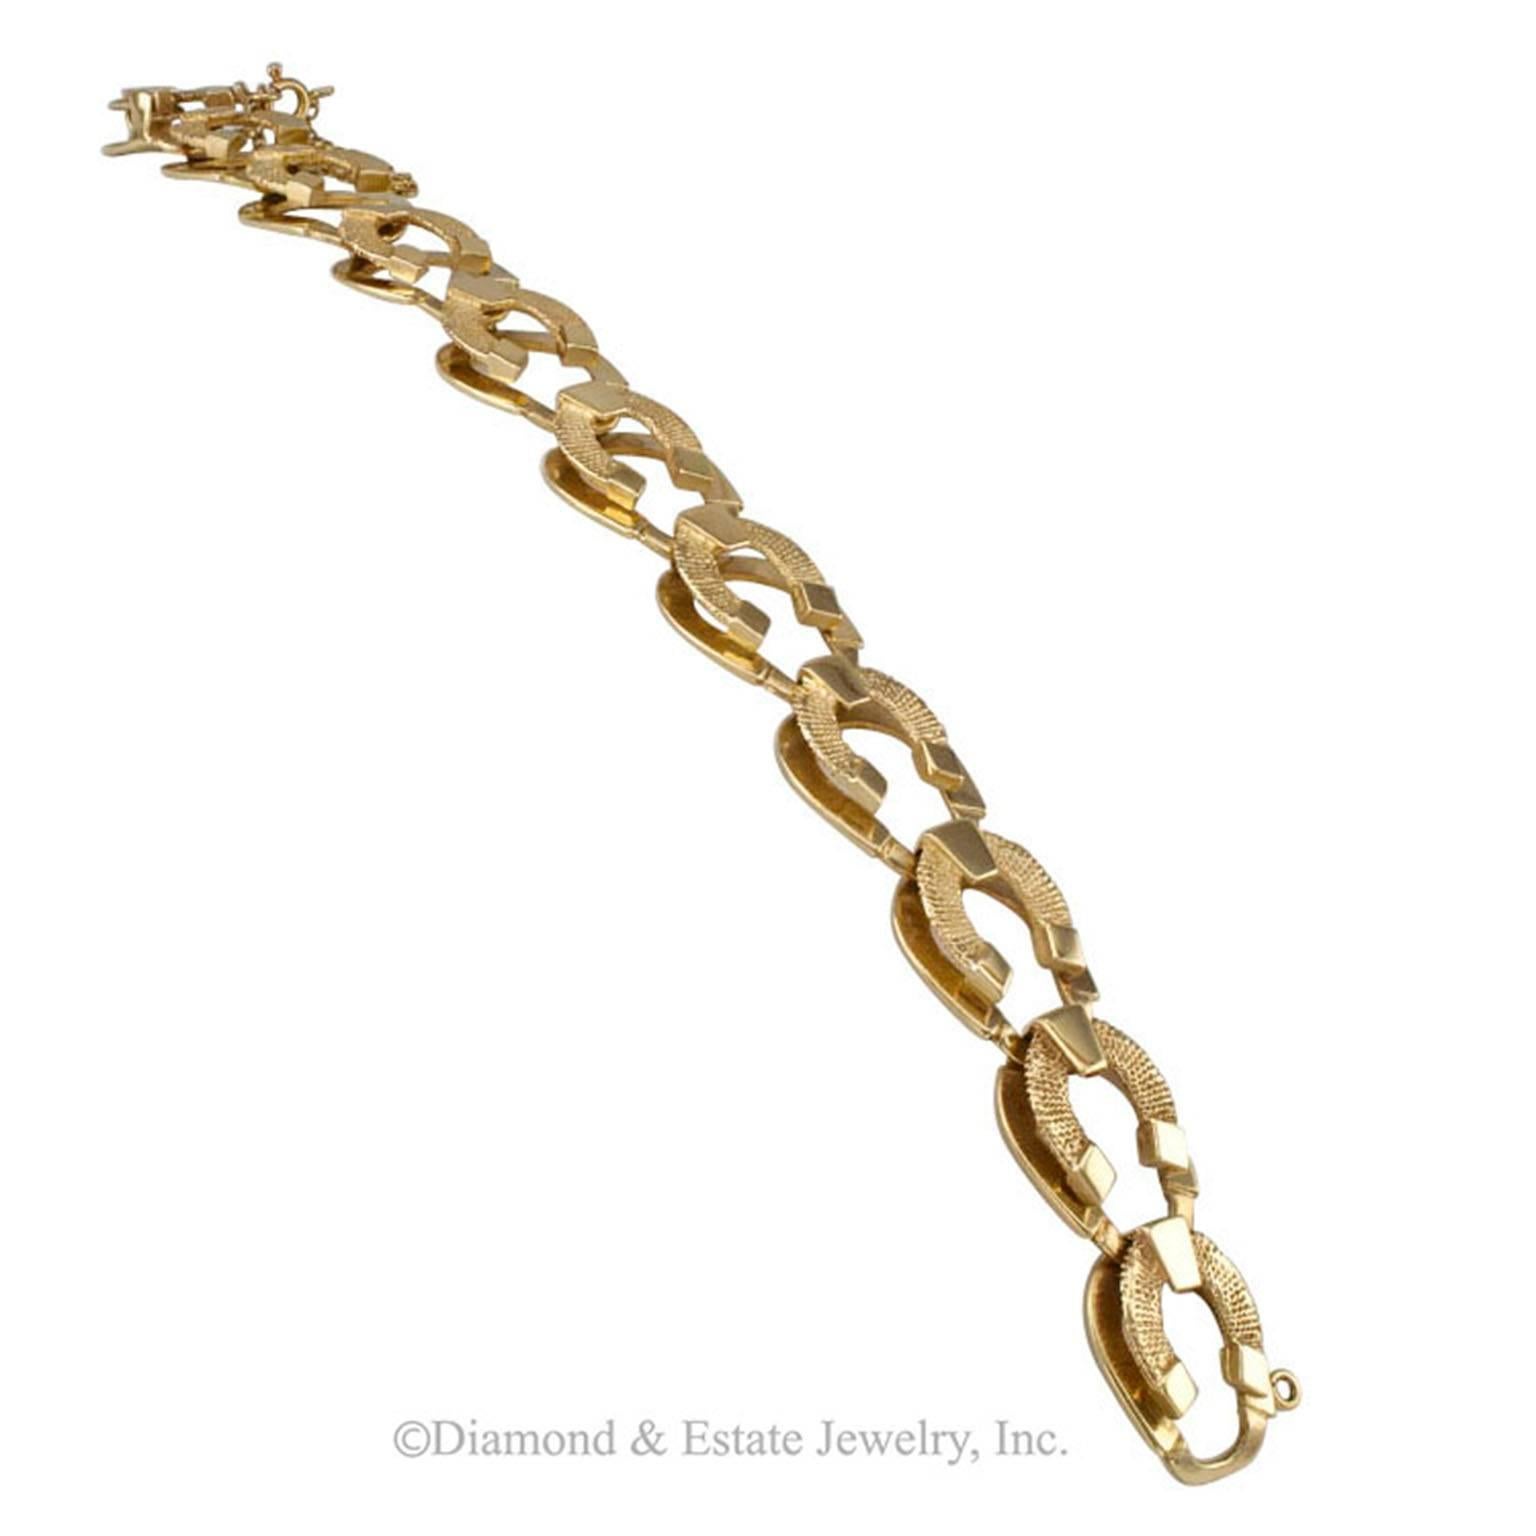 1950s Horseshoe Link Gold Bracelet

Mid-century horseshoe link 14-karat yellow gold lady's bracelet circa 1950.  The design features a textured gold horseshoe motif overlapping a similar bright polished gold motif producing an attractive and